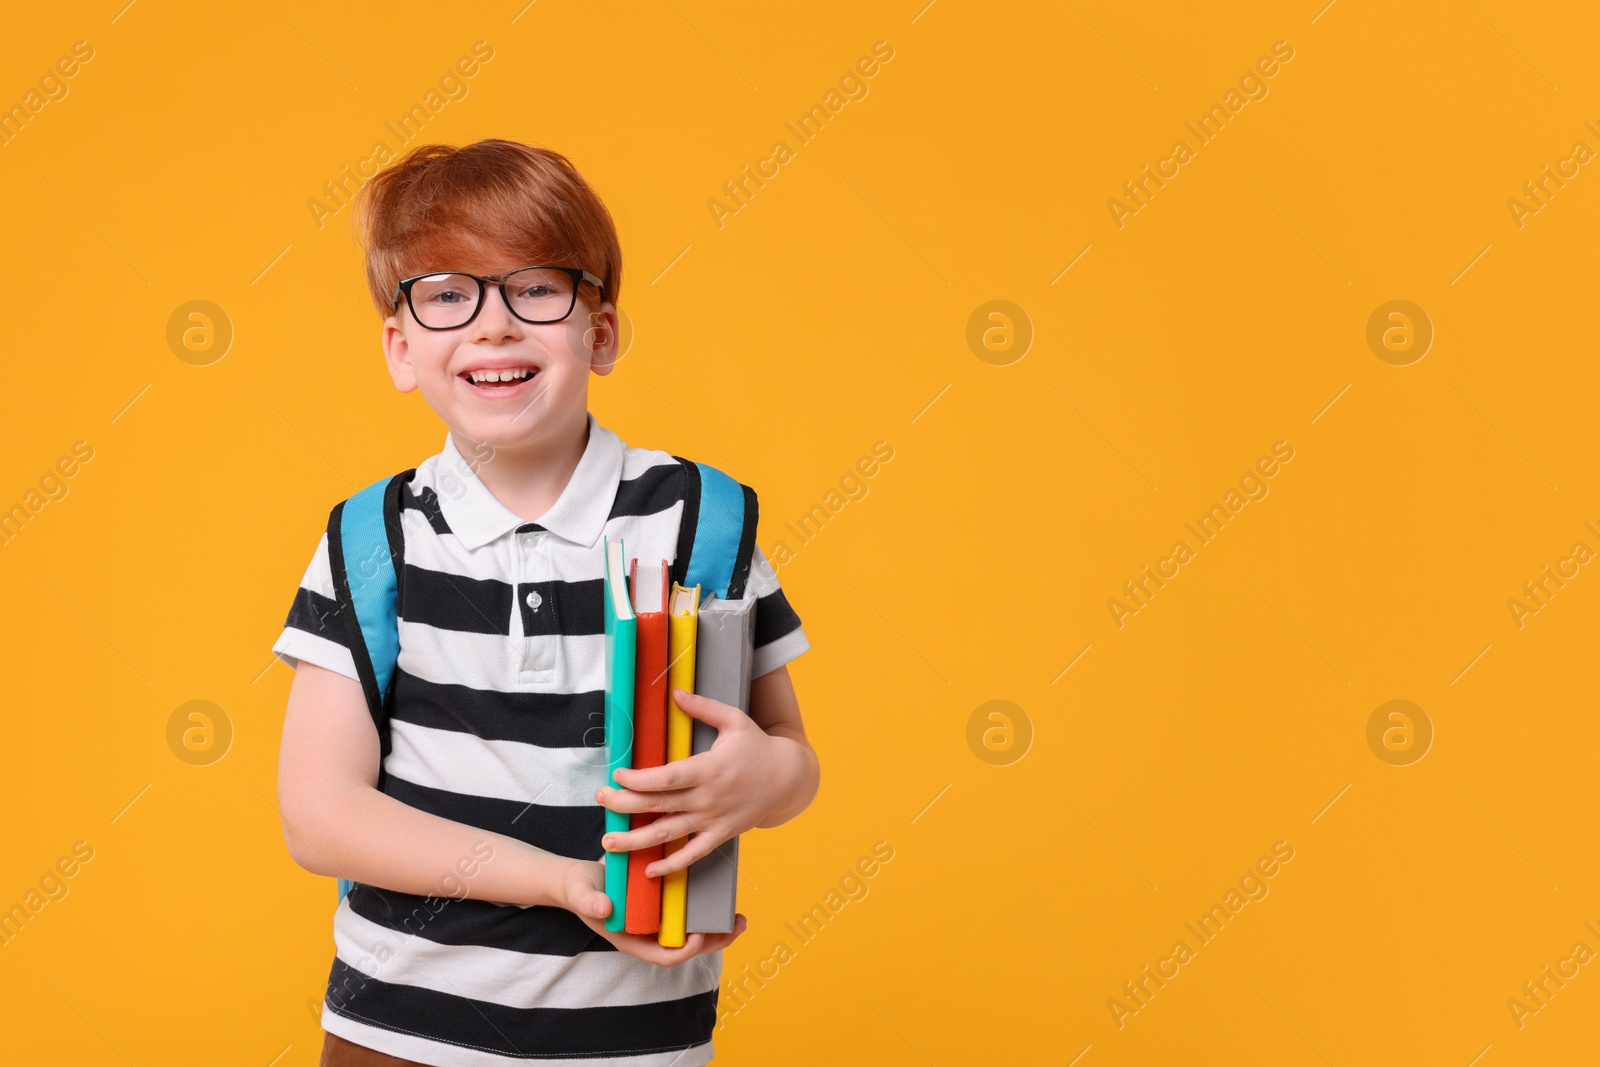 Photo of Happy schoolboy with backpack and books on orange background. Space for text